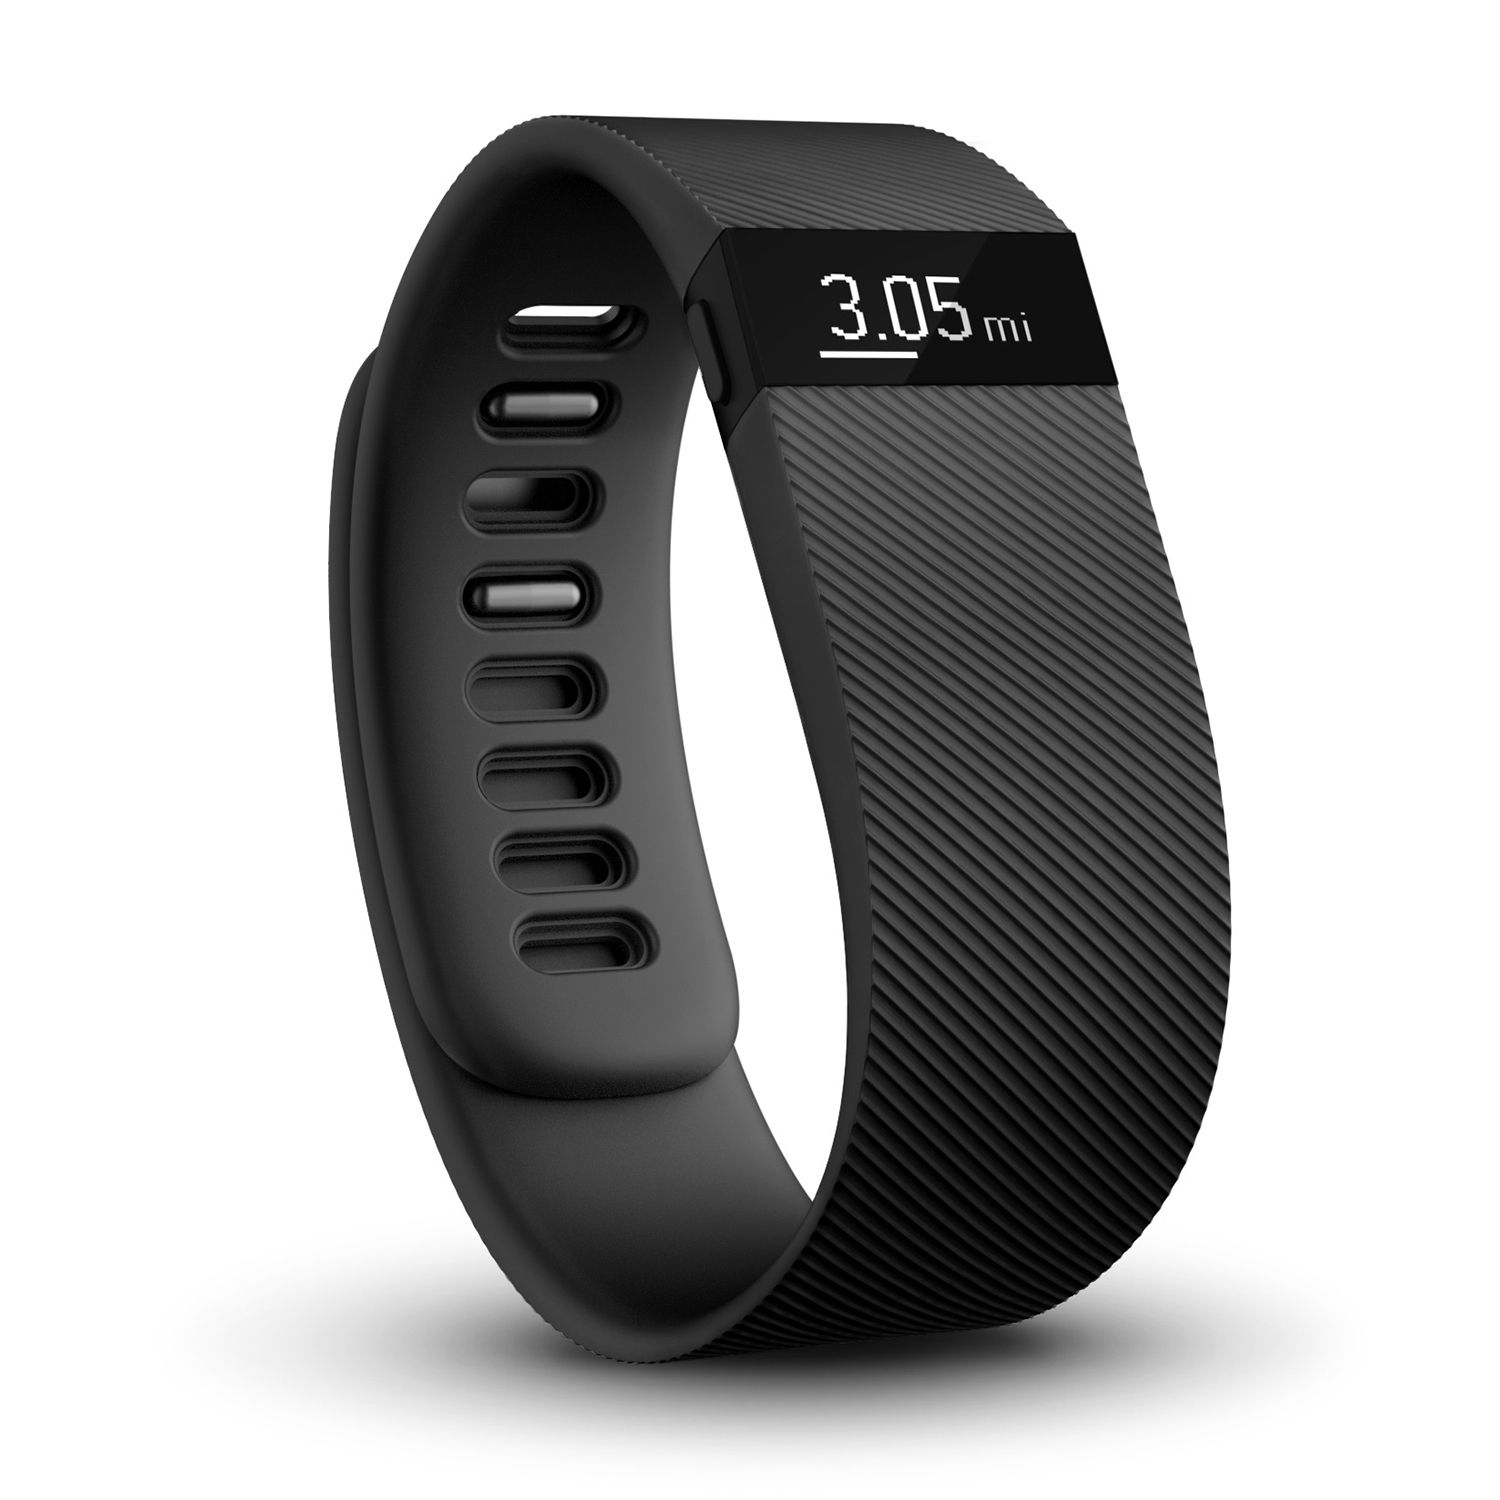 fitbit charge 3 at kohl's